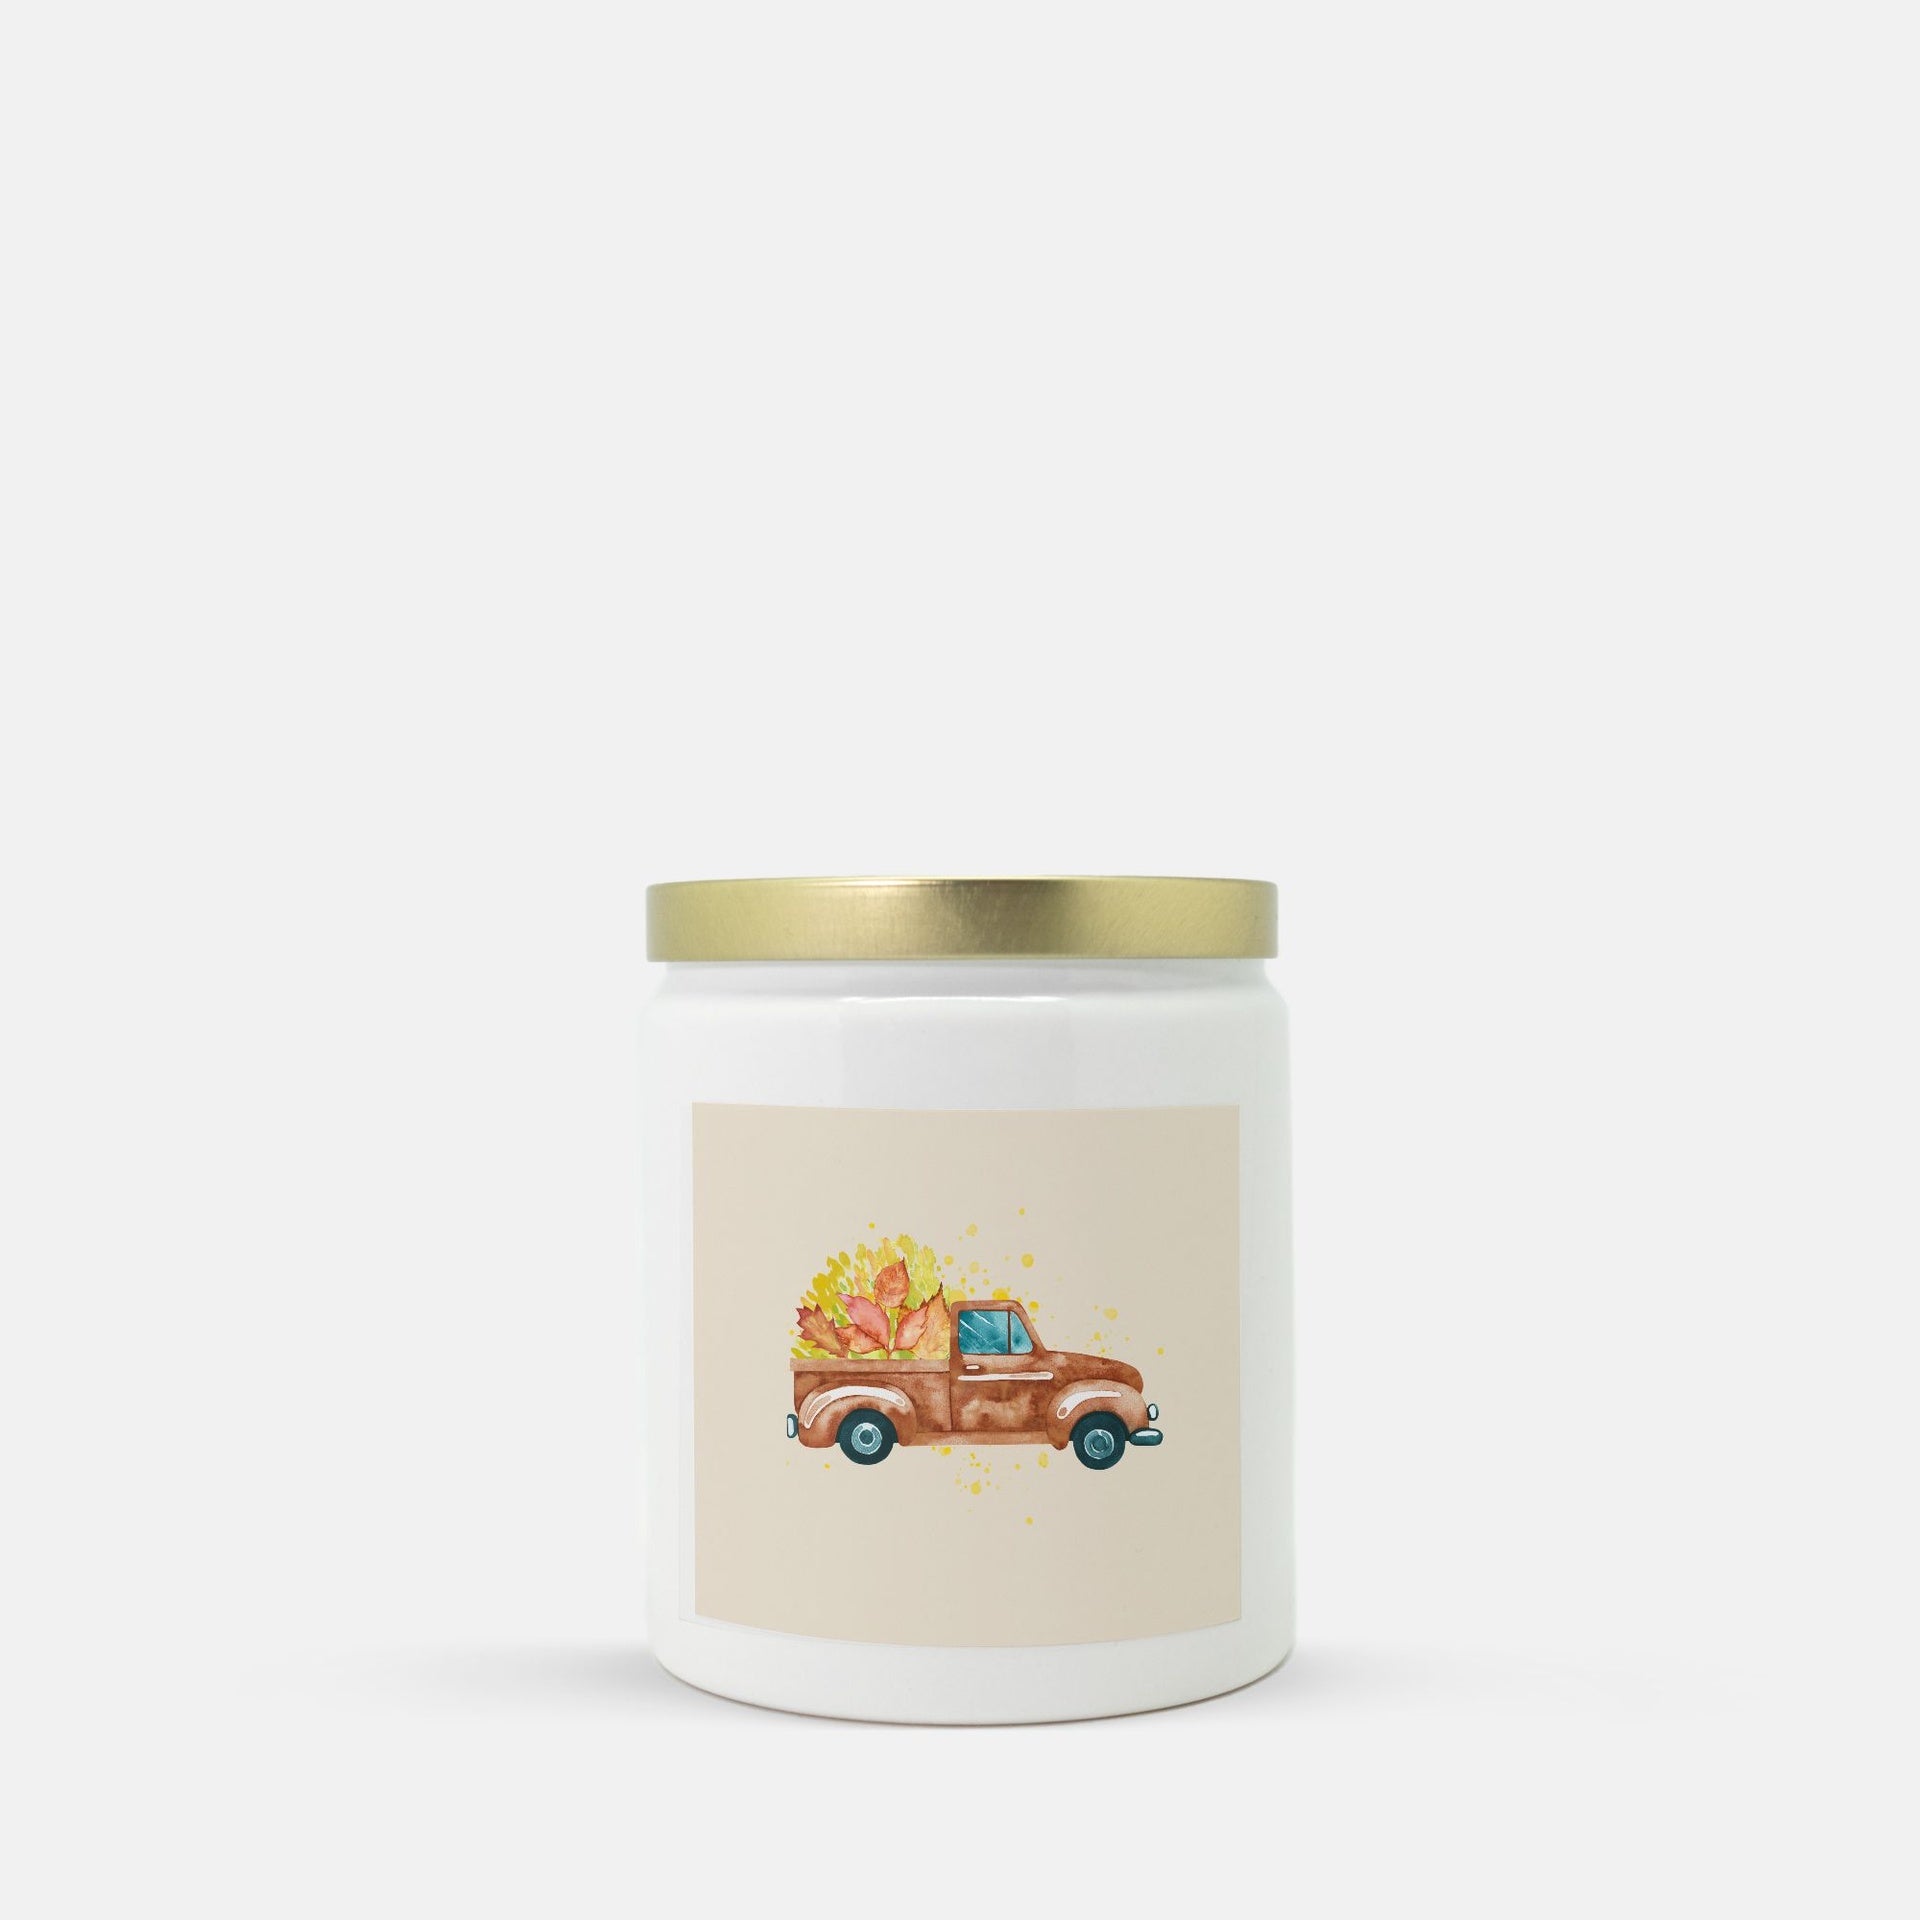 Lifestyle Details - Brown Rustic Truck & Leaves Ceramic Candle w Gold Lid - Macintosh